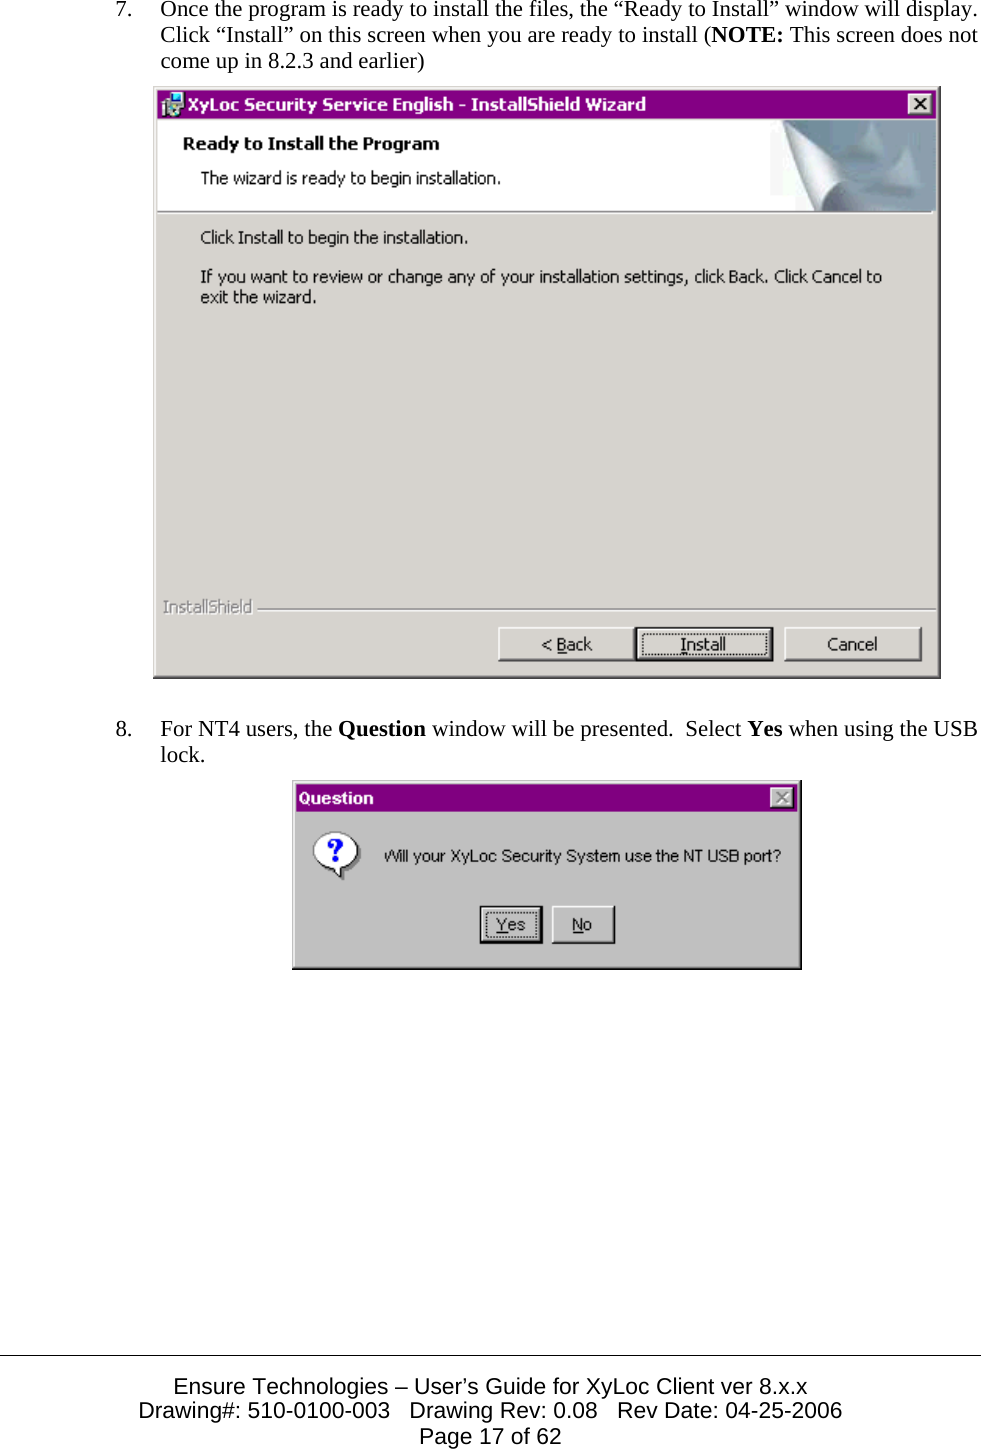  Ensure Technologies – User’s Guide for XyLoc Client ver 8.x.x Drawing#: 510-0100-003   Drawing Rev: 0.08   Rev Date: 04-25-2006 Page 17 of 62 7. Once the program is ready to install the files, the “Ready to Install” window will display.  Click “Install” on this screen when you are ready to install (NOTE: This screen does not come up in 8.2.3 and earlier)   8. For NT4 users, the Question window will be presented.  Select Yes when using the USB lock.  